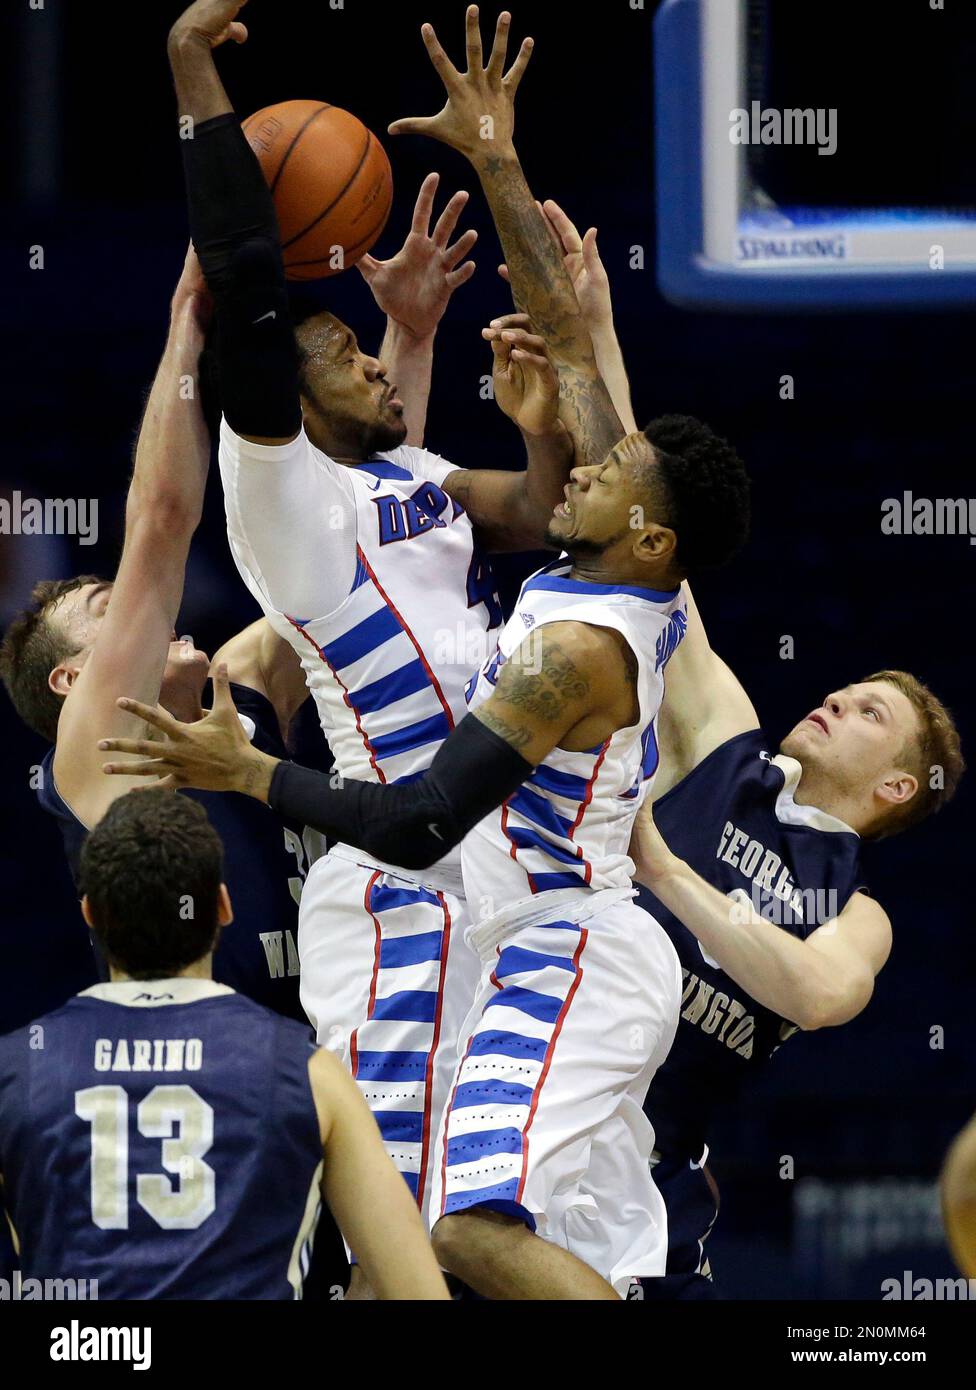 DePaul forward Myke Henry, second from left, guard Aaron Simpson, second  from right, battle for a rebound against George Washington forward Tyler  Cavanaugh, left, and guard Paul Jorgensen during the first half